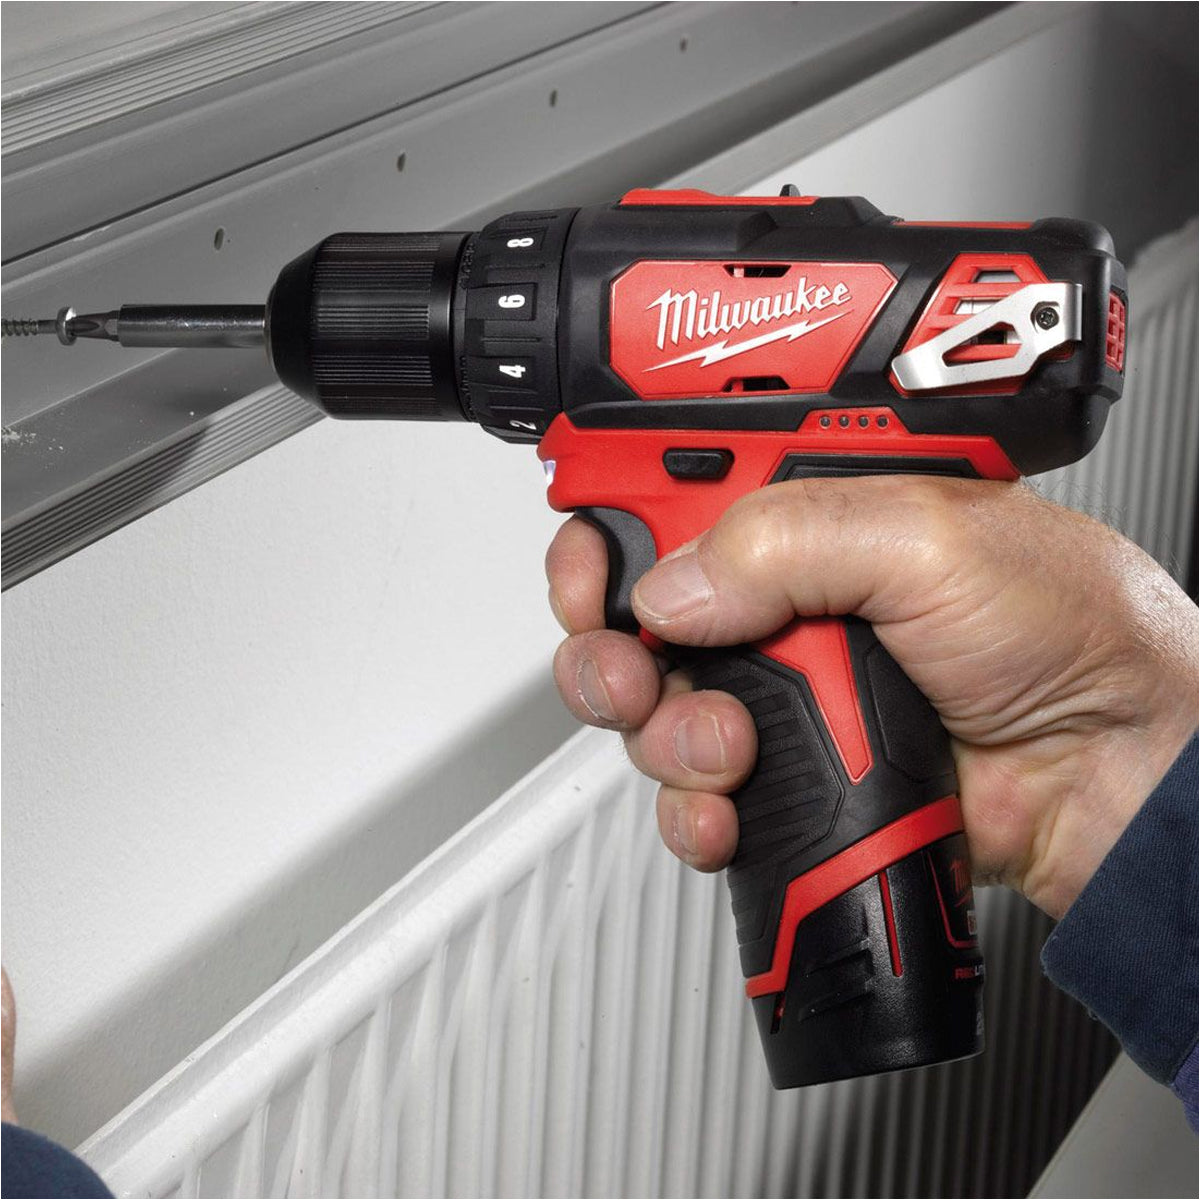 Milwaukee M12 BDDXKIT-202C 12V Drill Driver with 2 x 2.0Ah Batteries, Charger & Case 4933447773